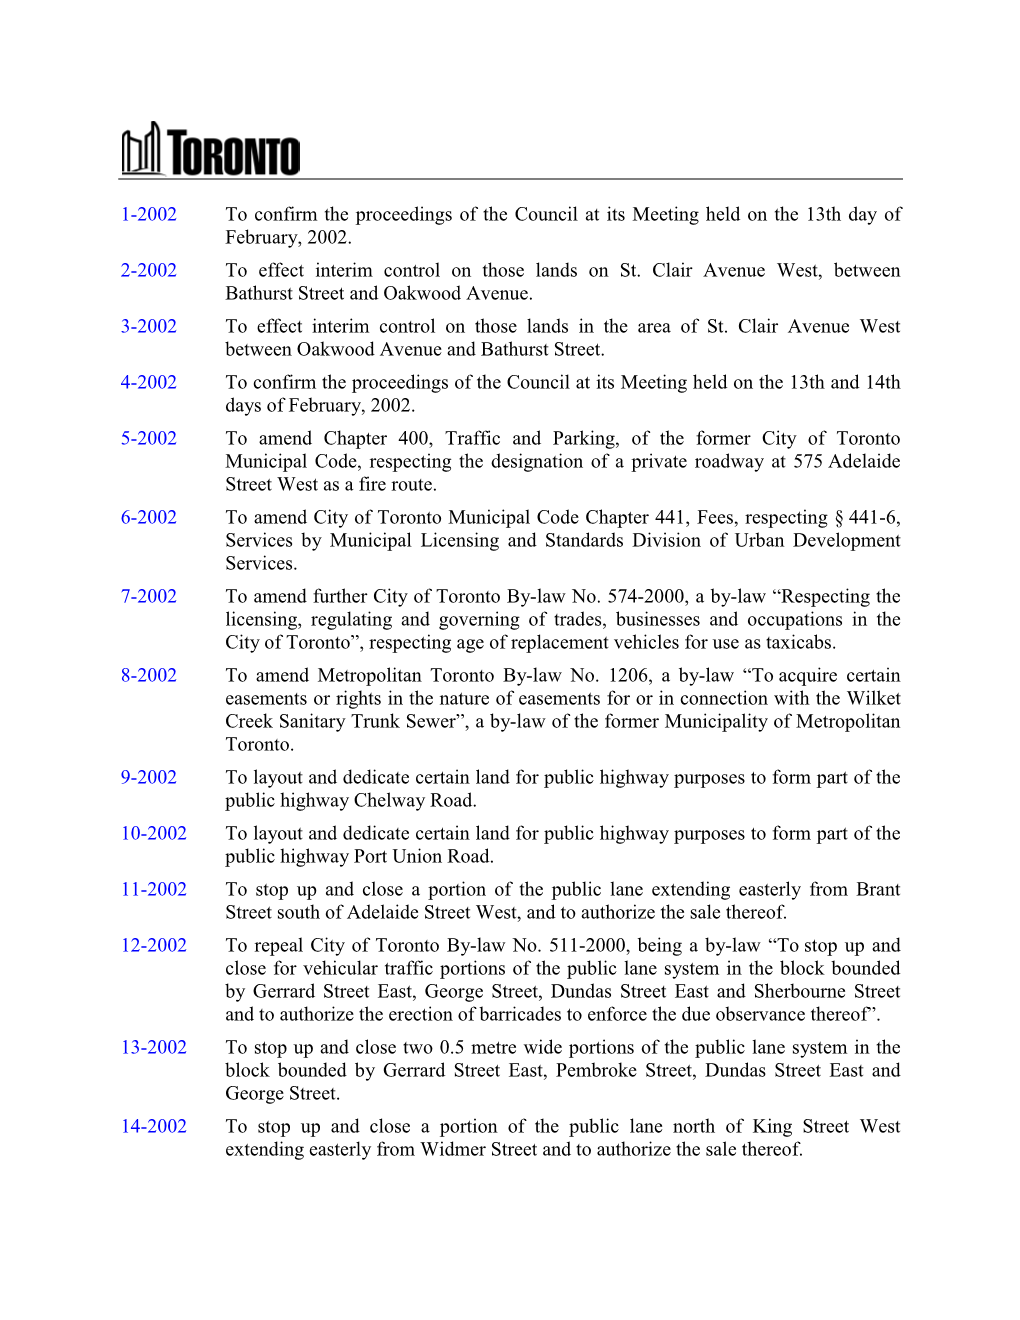 1-2002 to Confirm the Proceedings of the Council at Its Meeting Held on the 13Th Day of February, 2002